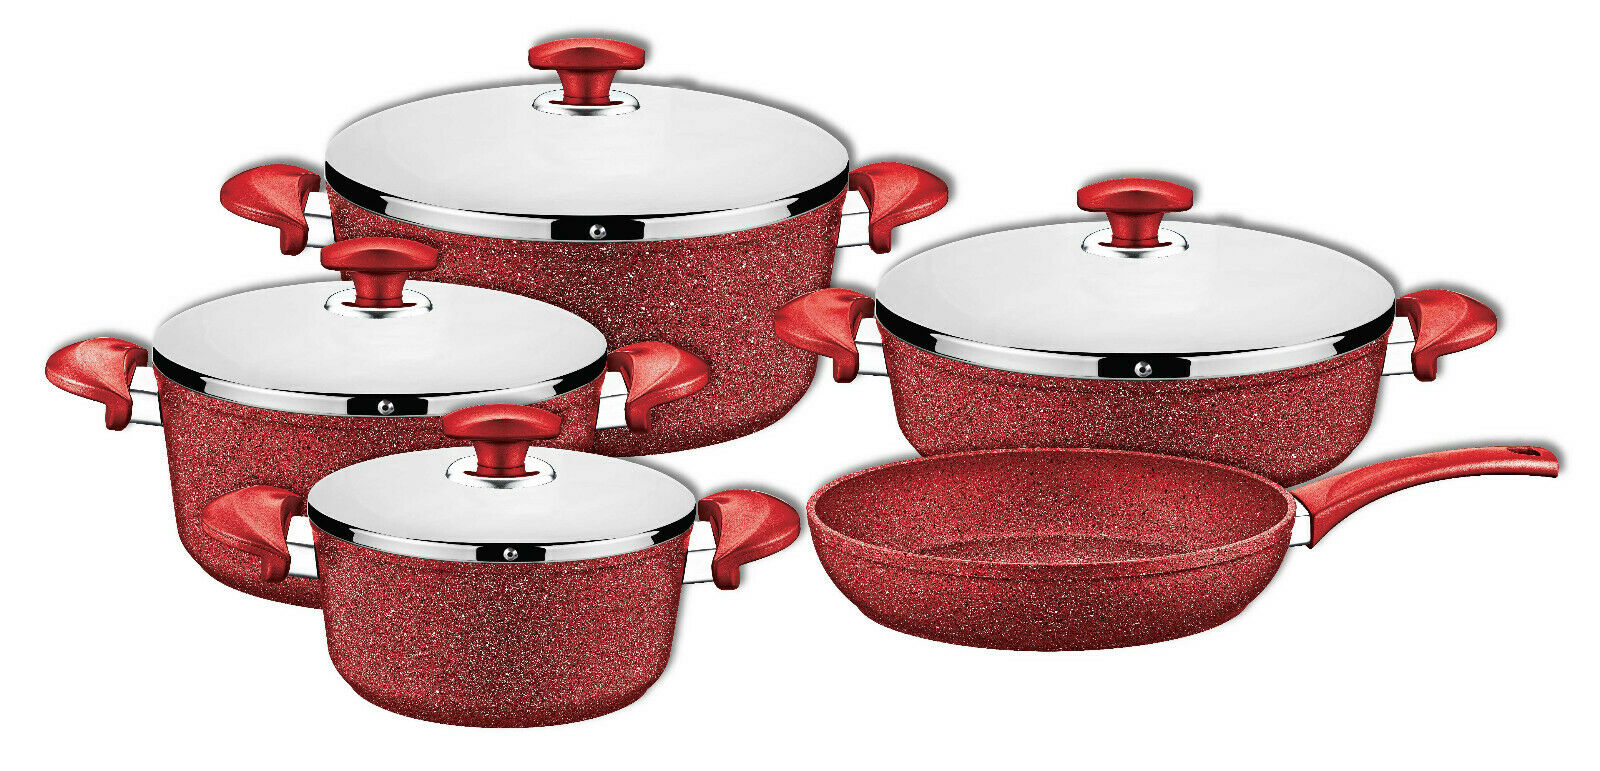 O.M.S. Granite Professional Cookware Set Casserole Pot Frying Pan S/Steel Red